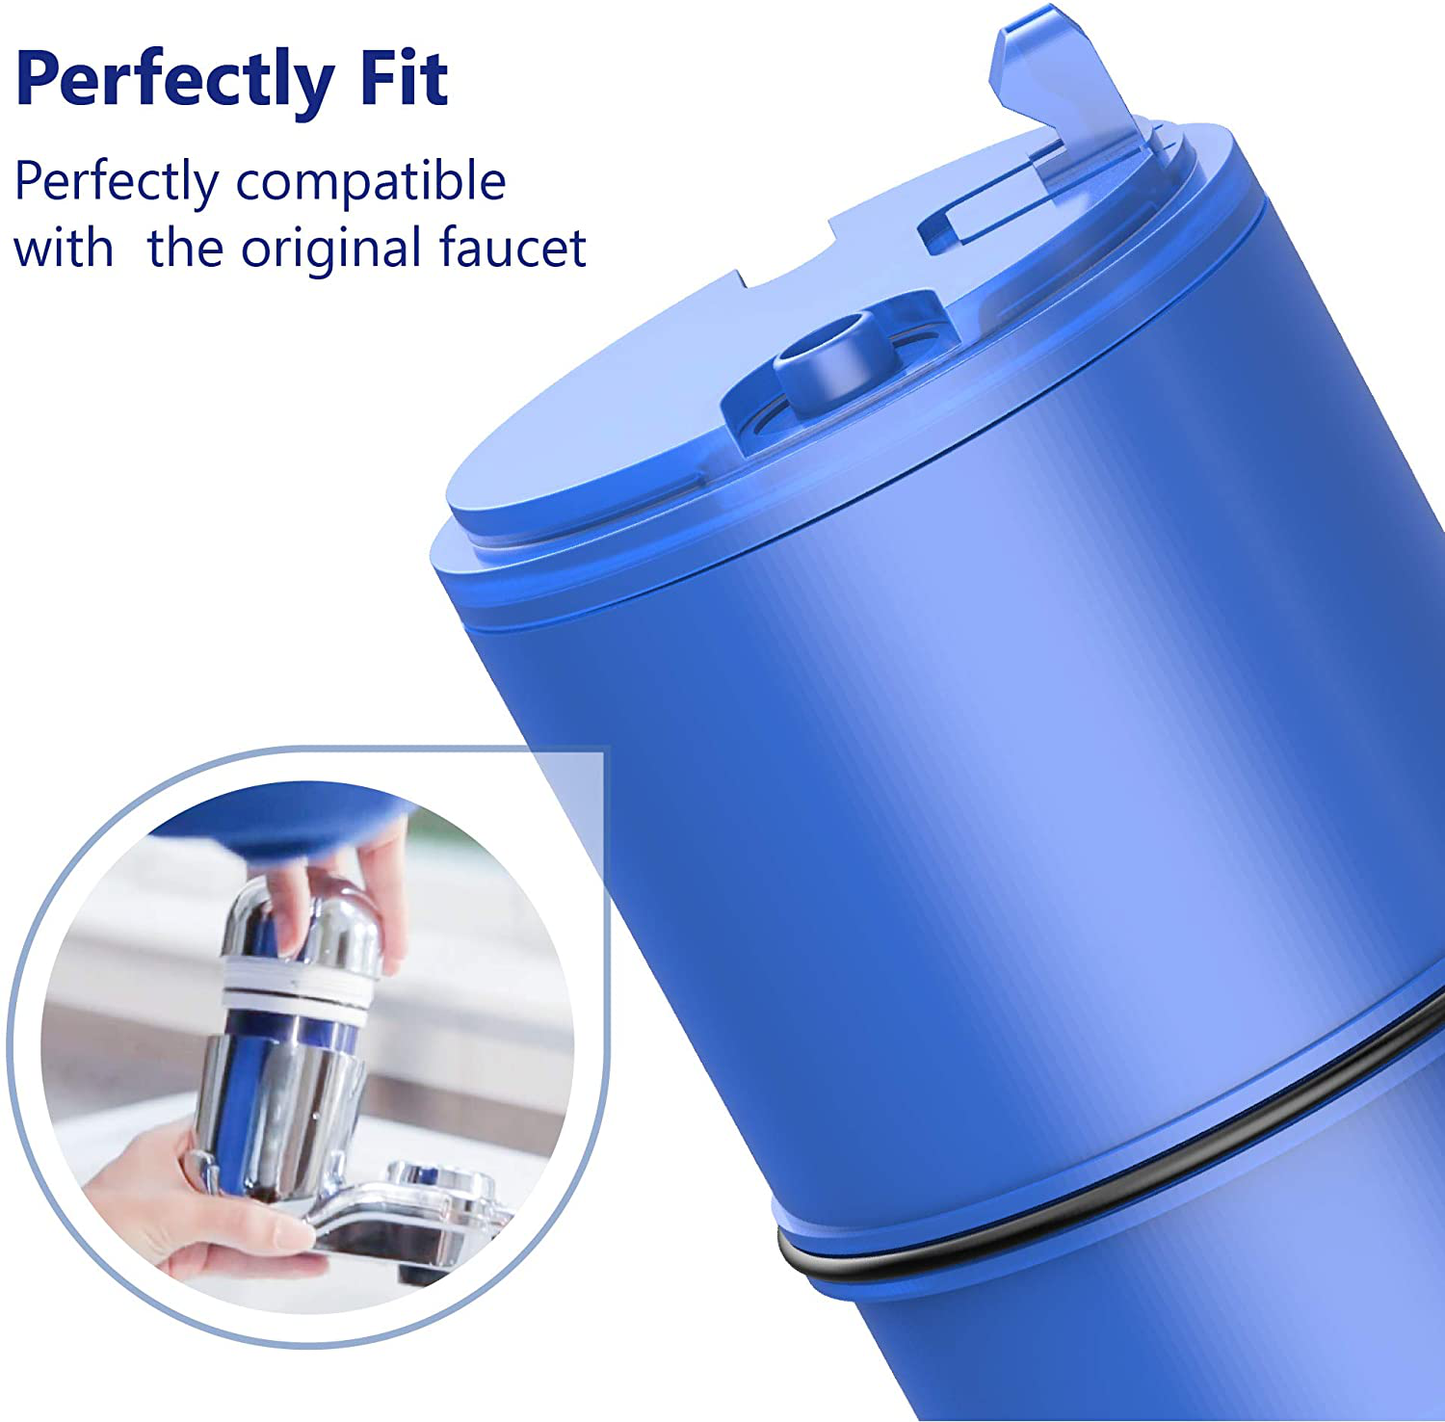 Overbest RF-9999 NSF Certified Water Filter, Replacement for Pur RF9999, RF-3375 Faucet Water Filter, Pur Faucet Model FM-2500V, FM-3700, PFM150W, PFM350V, PFM400H, PFM450S, Pur-0A1 (Pack of 3)